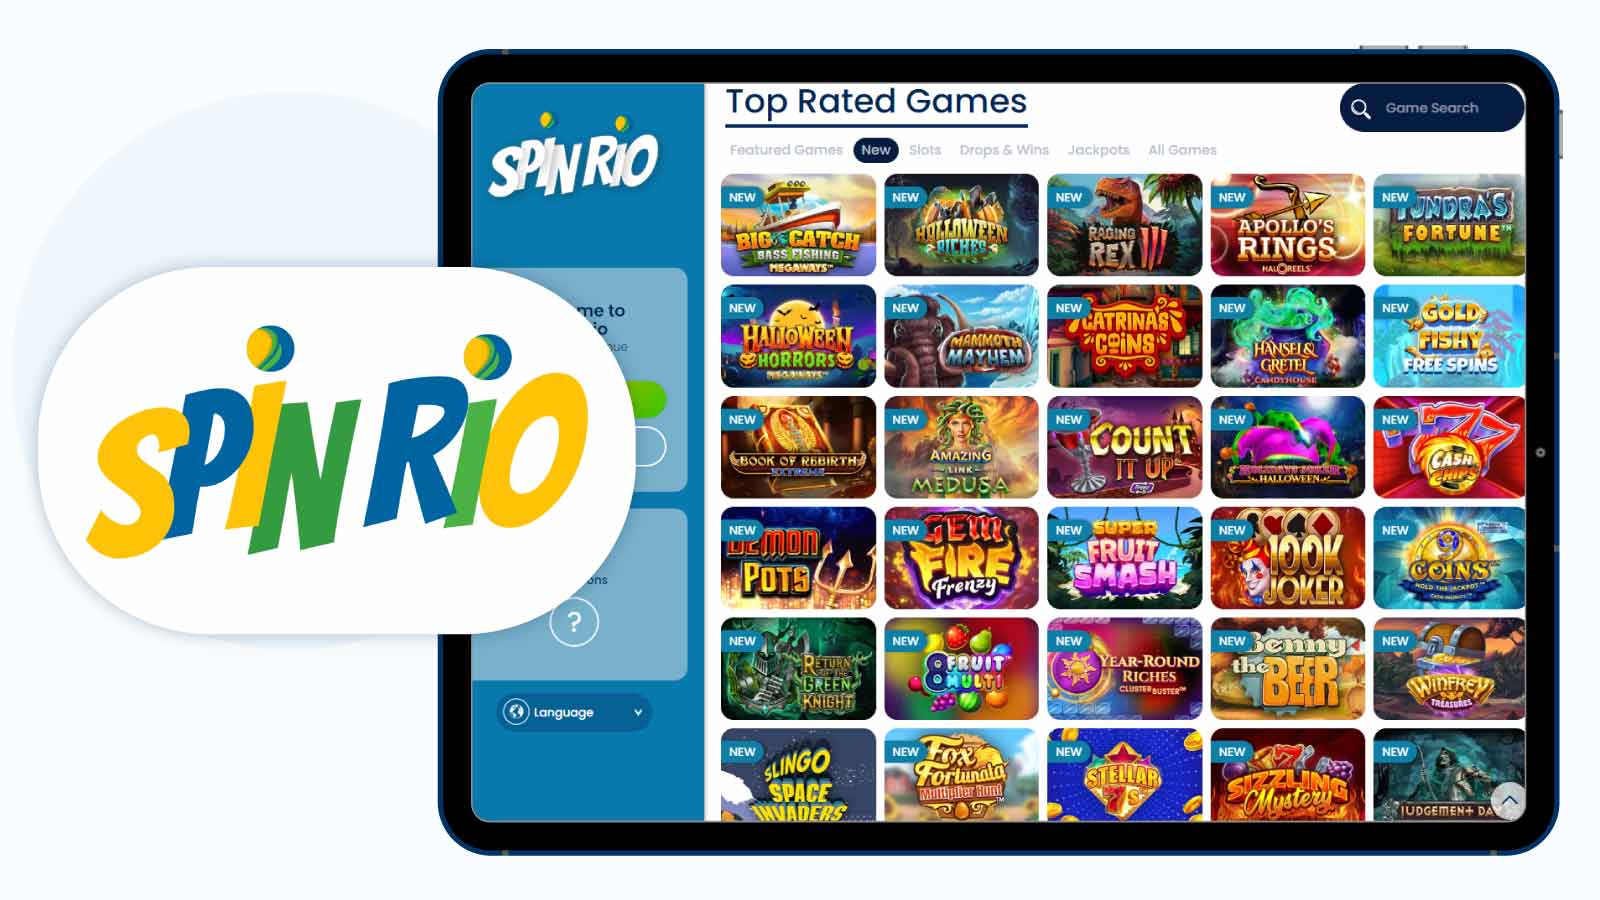 Spin Rio Casino King’s Recommendation for the Best AstroPay Casino